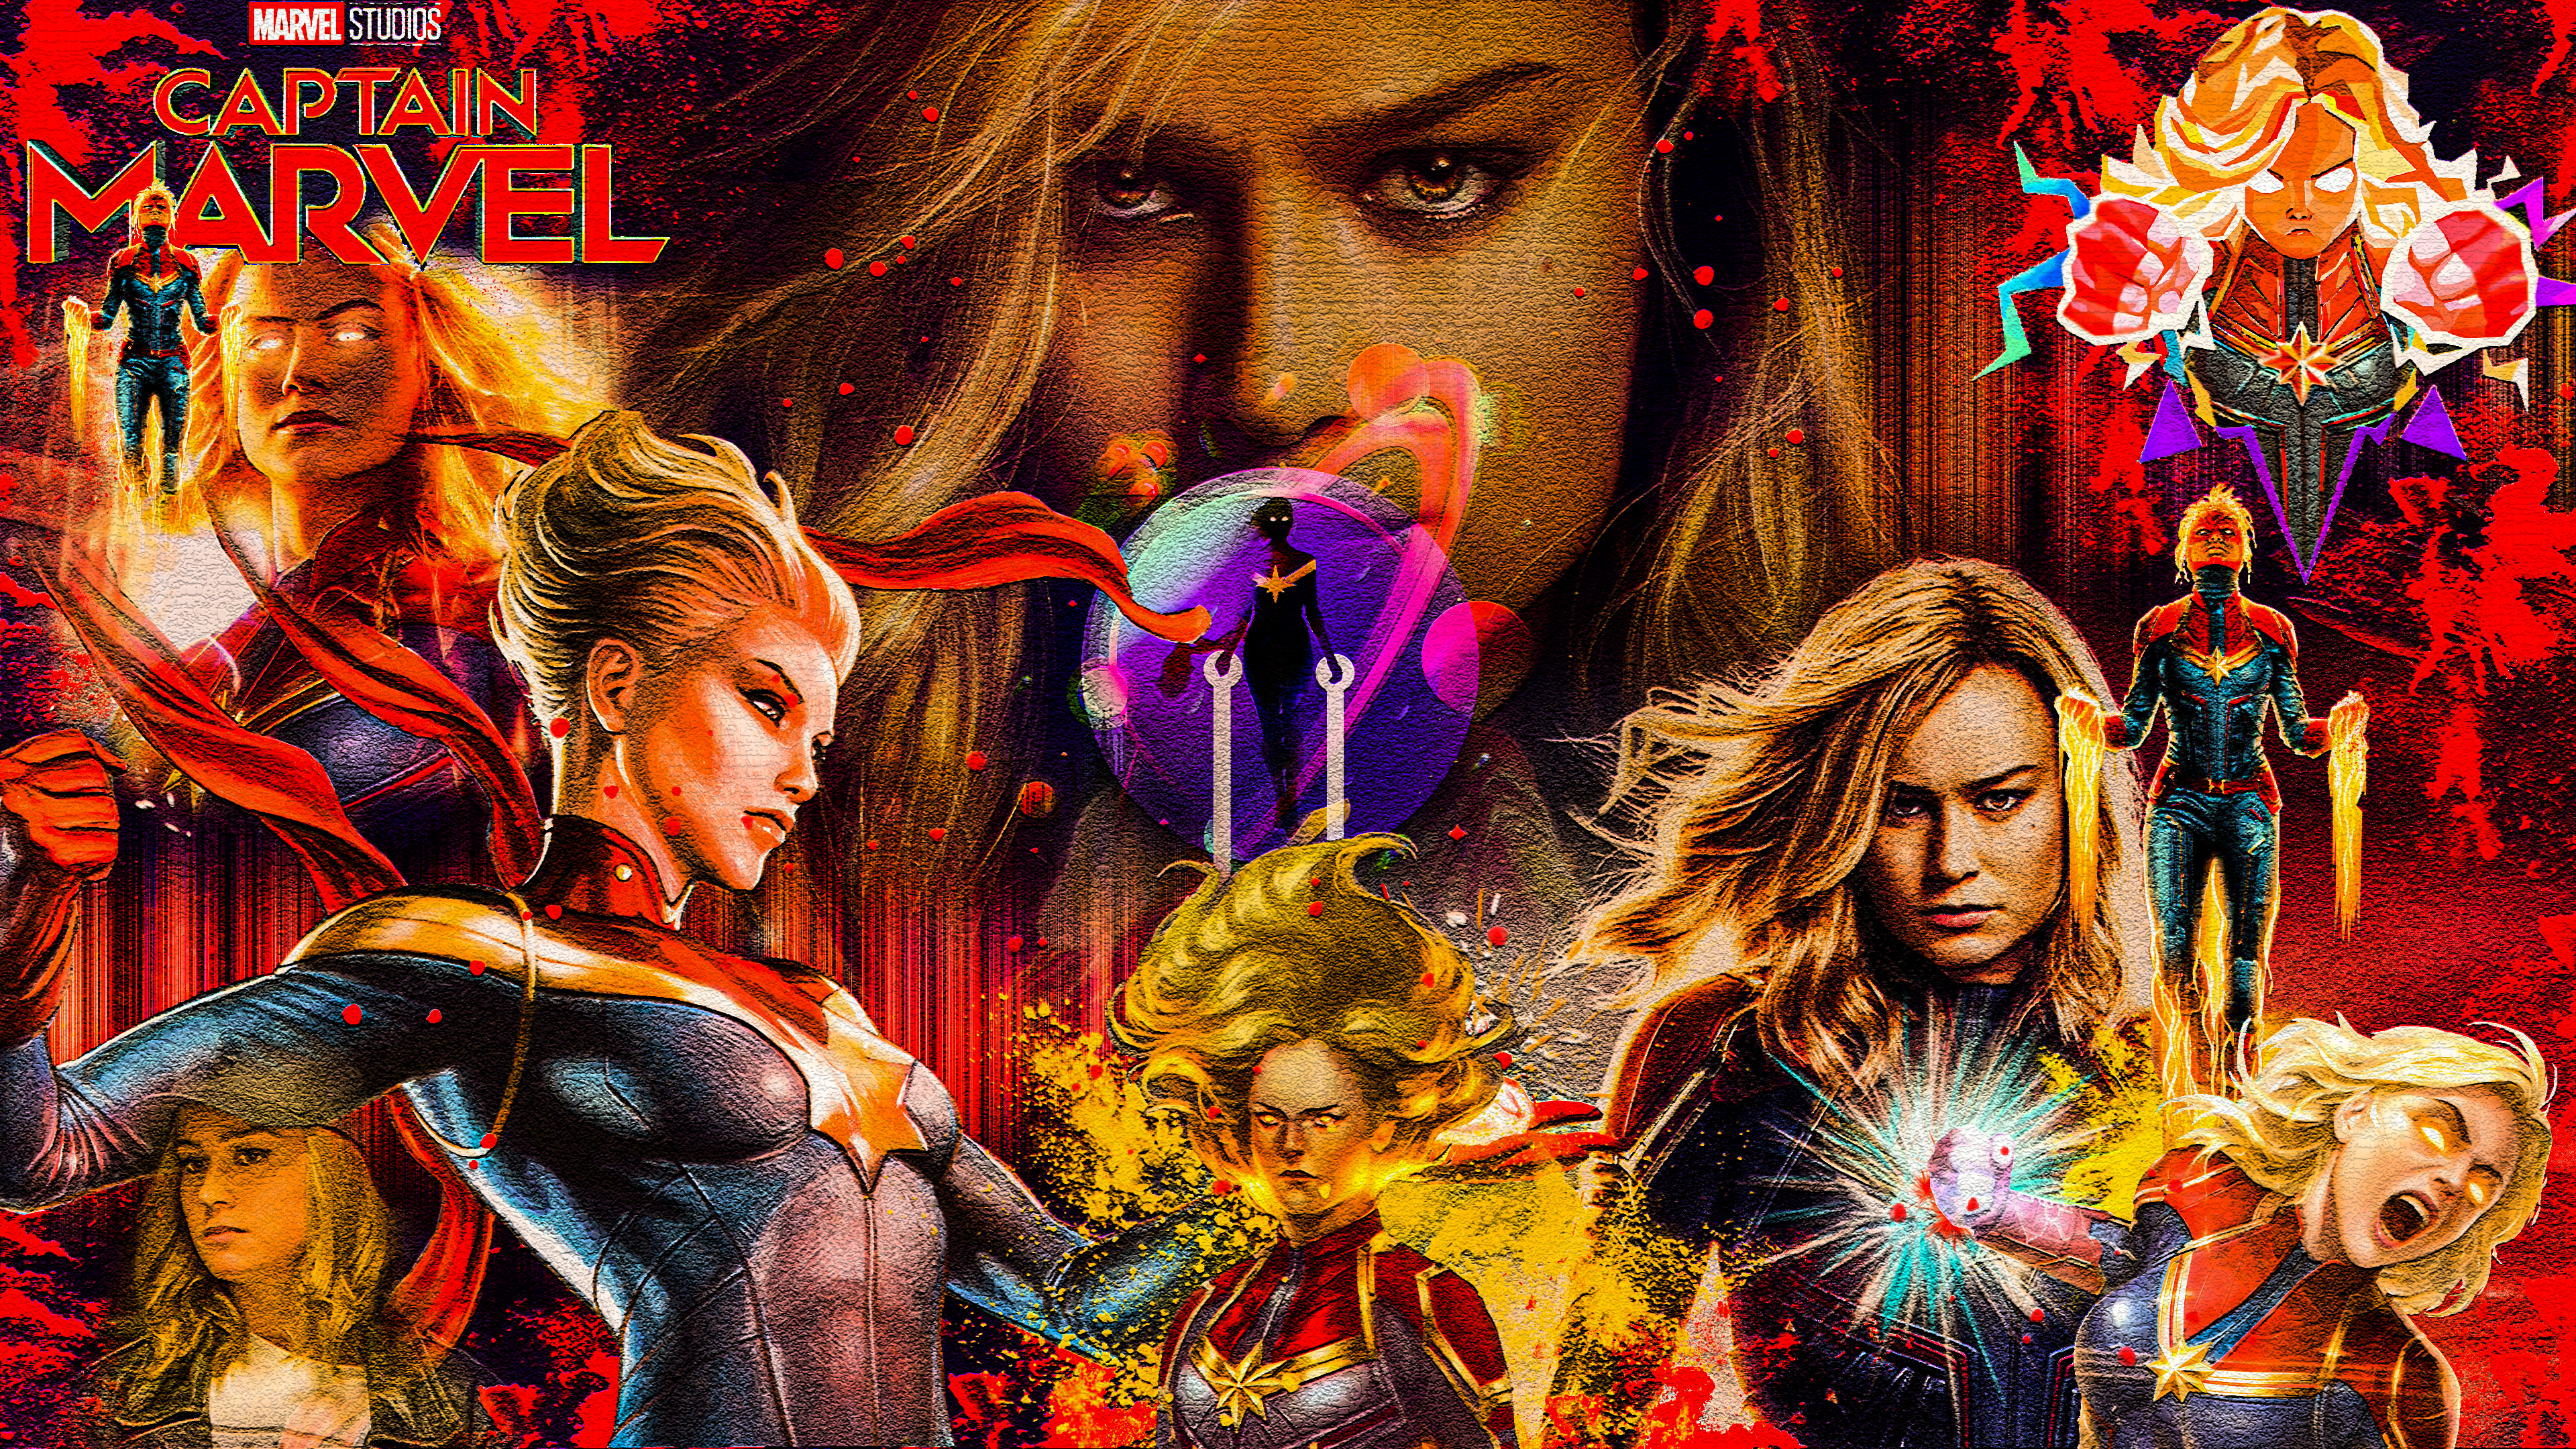 CAPTAIN MARVEL comics and movie moments by Boix